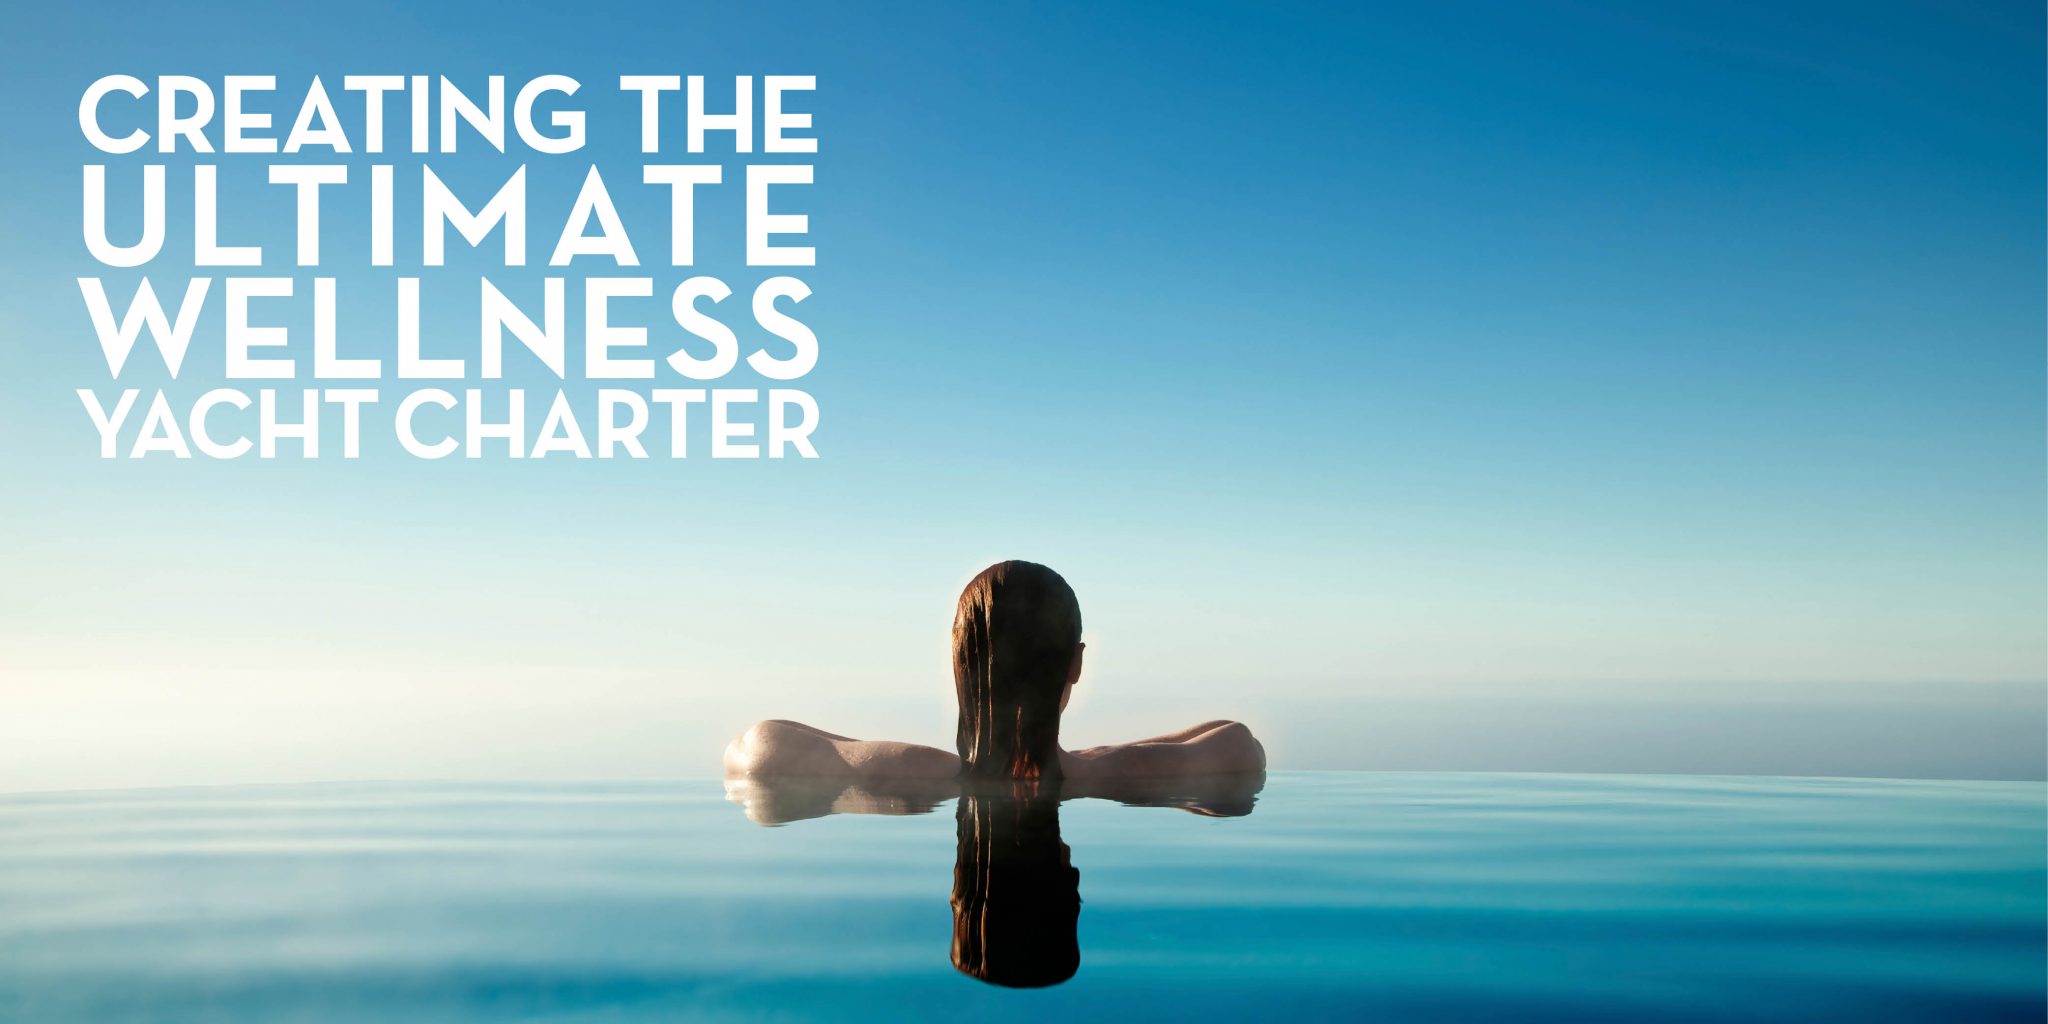 Creating the ultimate wellness superyacht charter